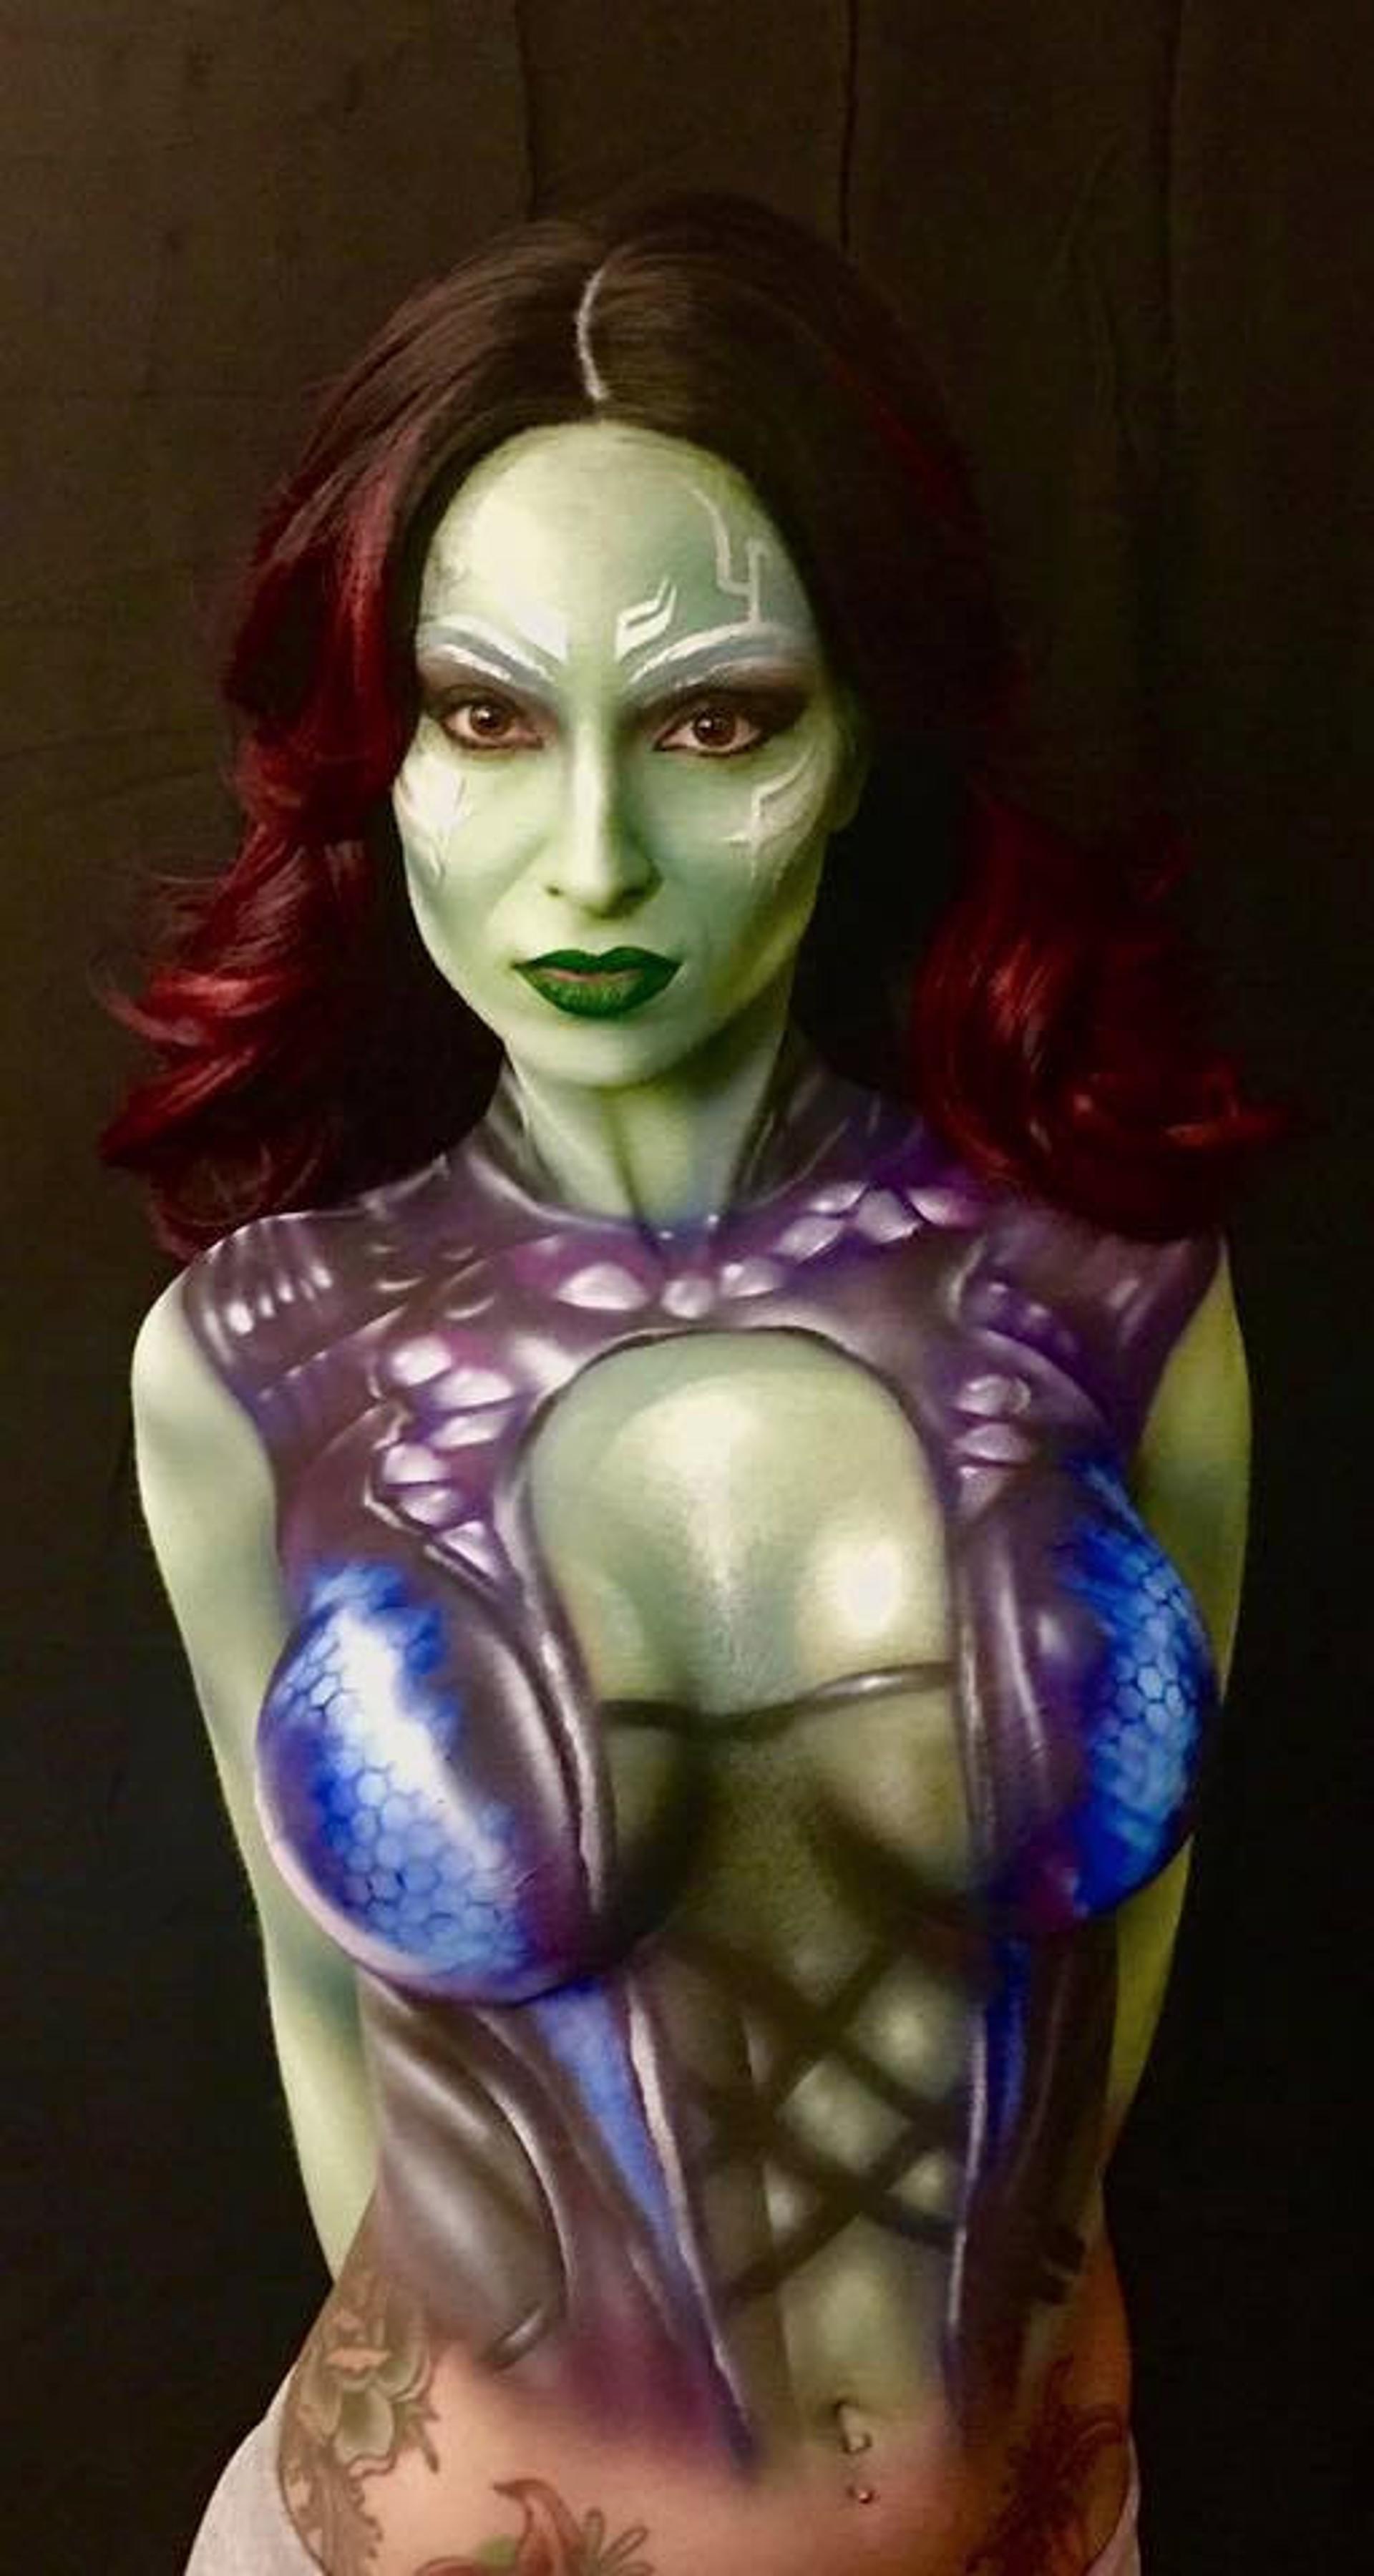 Body Painting by Artistic Talent Group - Live Painting Services services in  Orlando, FL